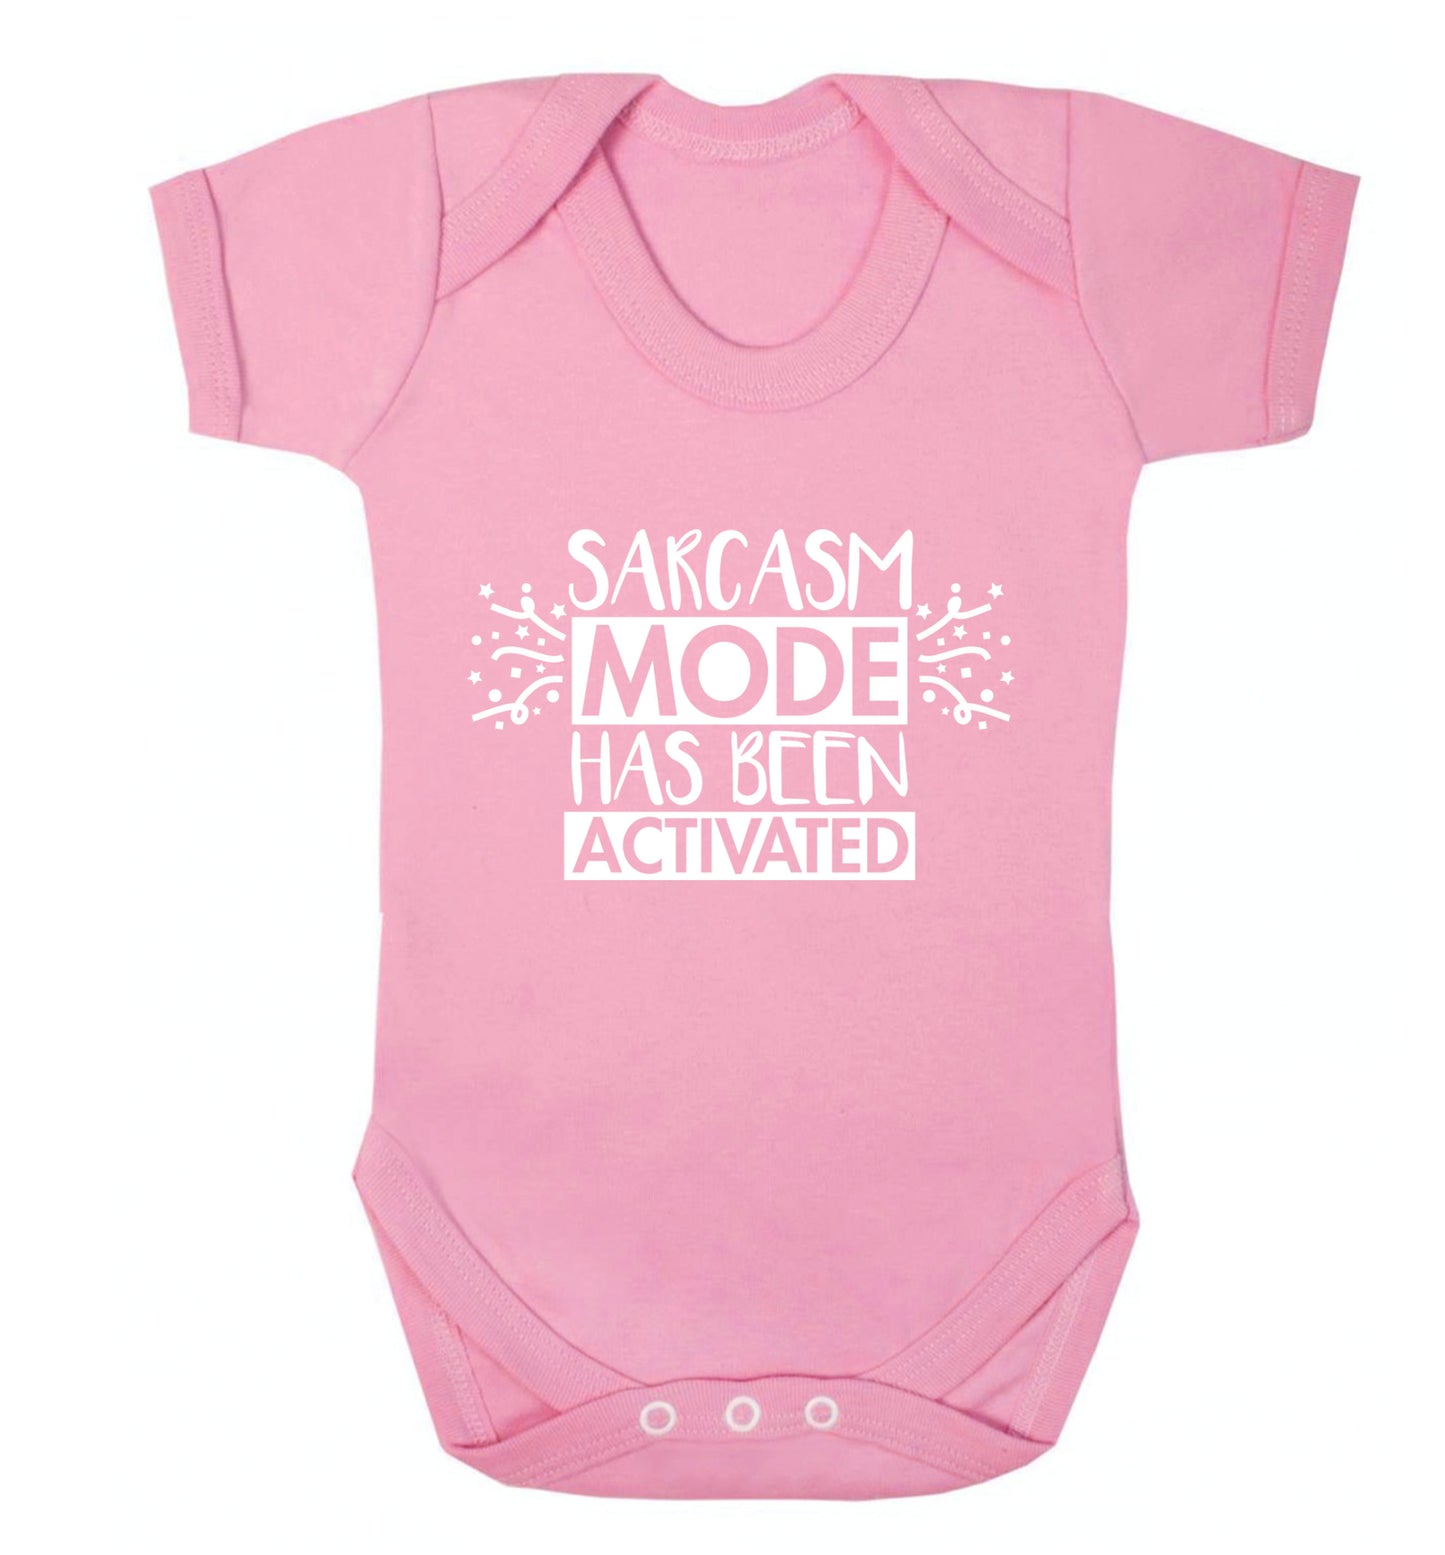 Sarcarsm mode has been activated Baby Vest pale pink 18-24 months